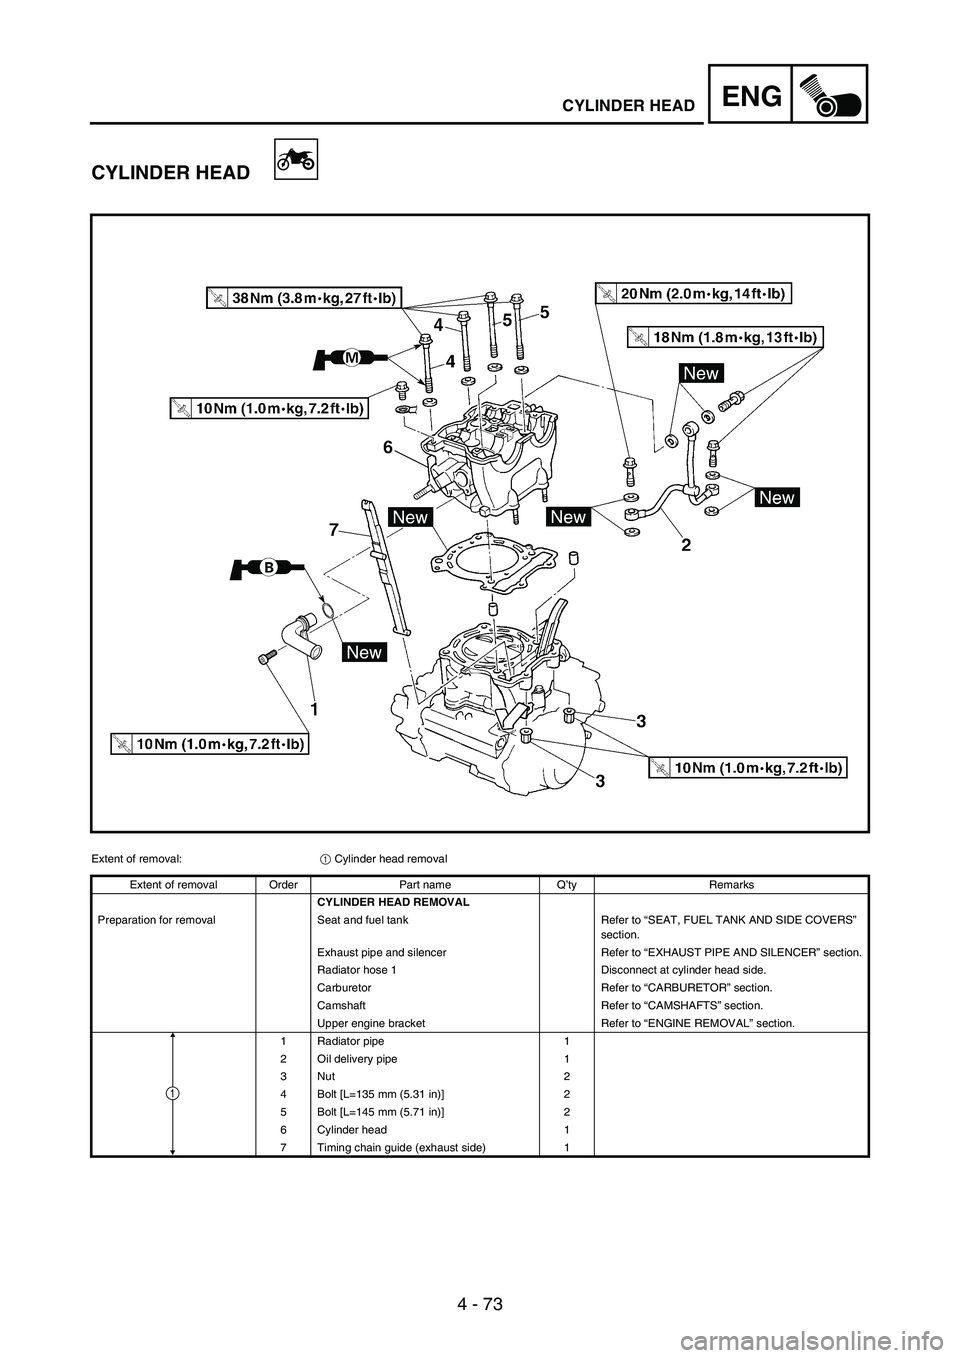 YAMAHA WR 250F 2005  Manuale duso (in Italian) 4 - 73
ENGCYLINDER HEAD
CYLINDER HEAD
Extent of removal:
1 Cylinder head removal
Extent of removal Order Part name Q’ty Remarks
CYLINDER HEAD REMOVAL
Preparation for removal Seat and fuel tank Refer